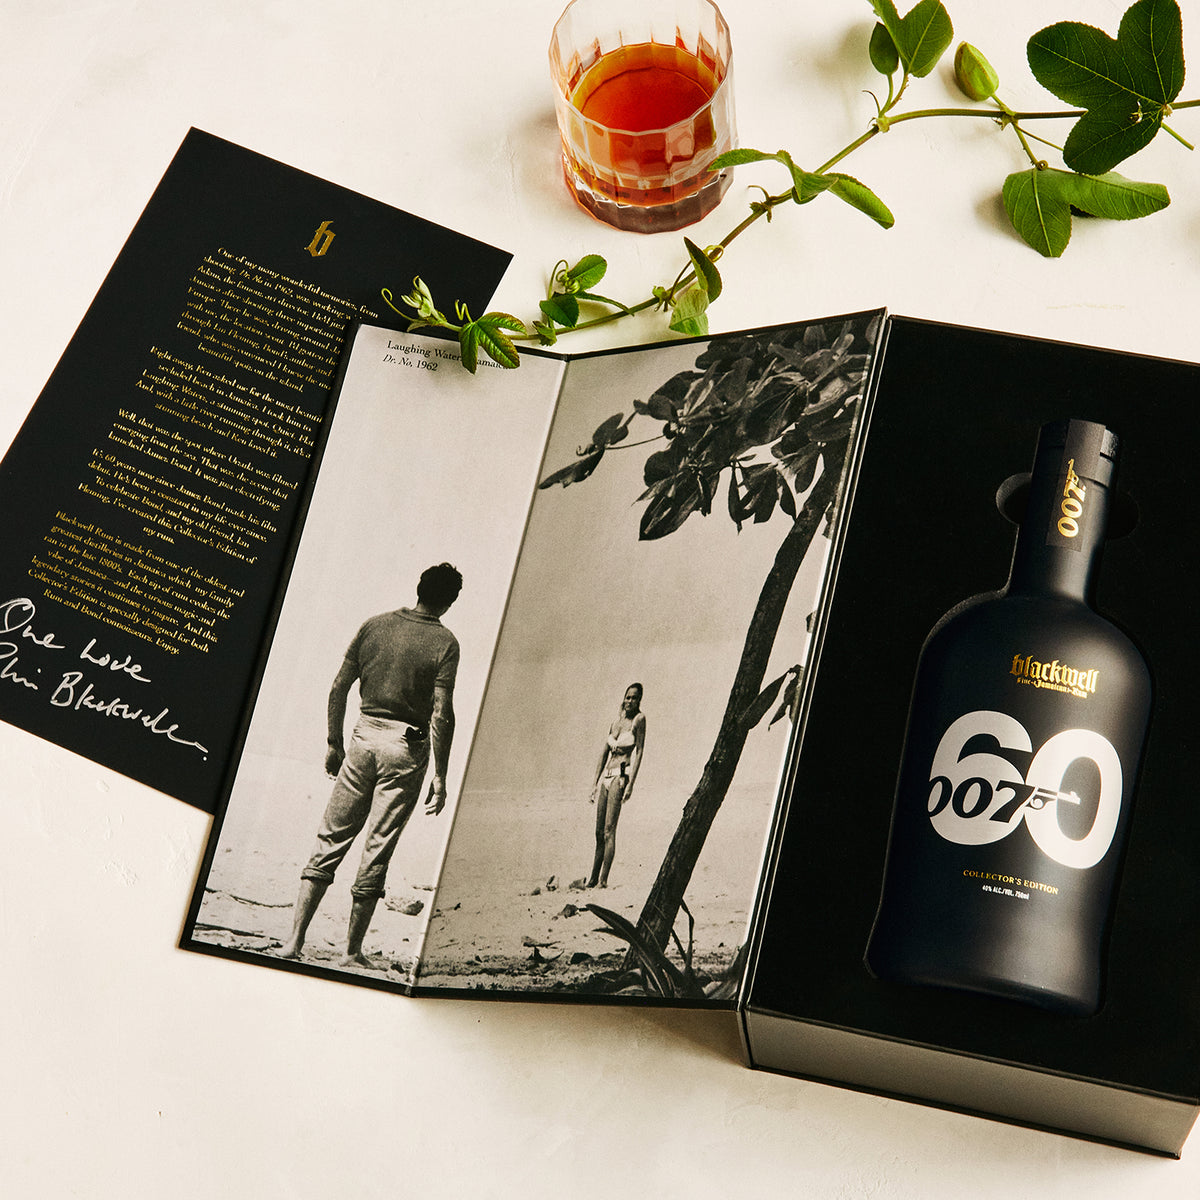 James Bond Jamaican Rum - Signed &amp; Numbered Edition - By Blackwell Rum